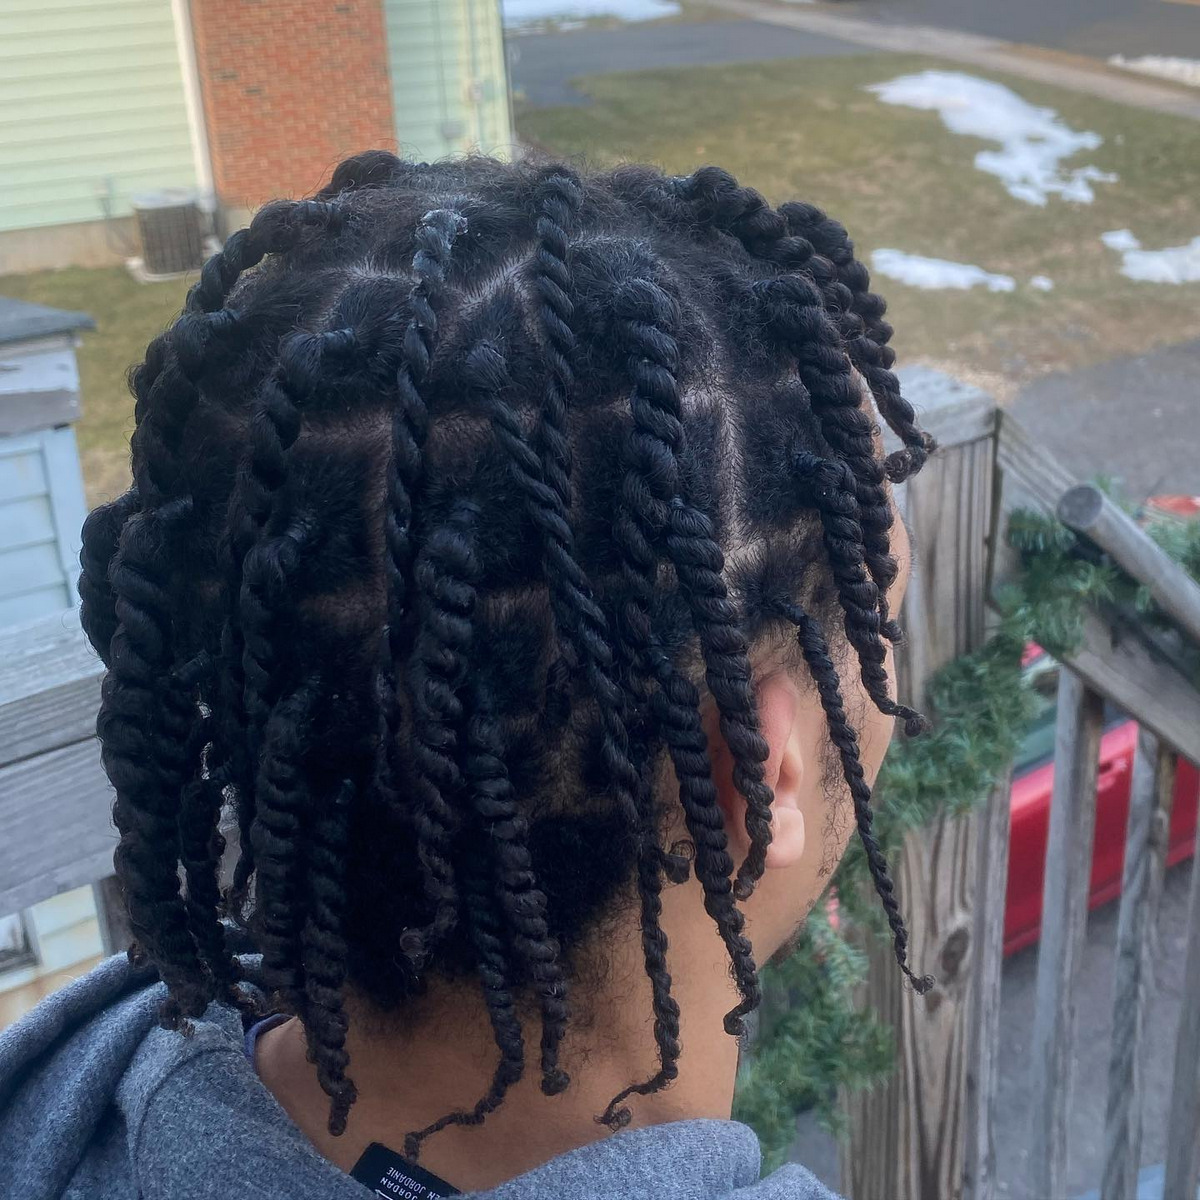 Two-strand twists hairstyle for boys and girls